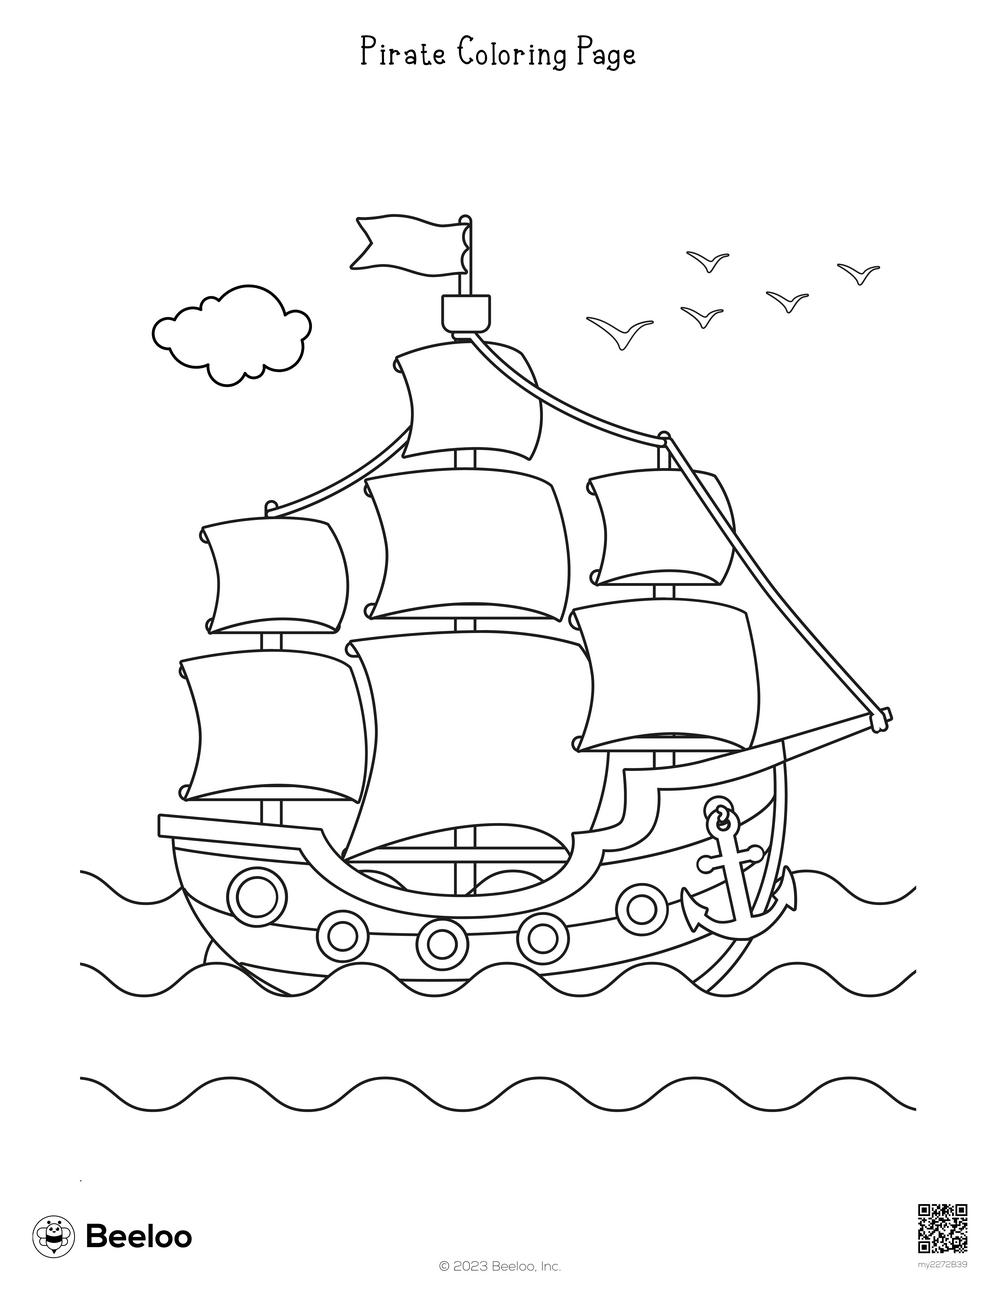 Pirate coloring page â printable crafts and activities for kids